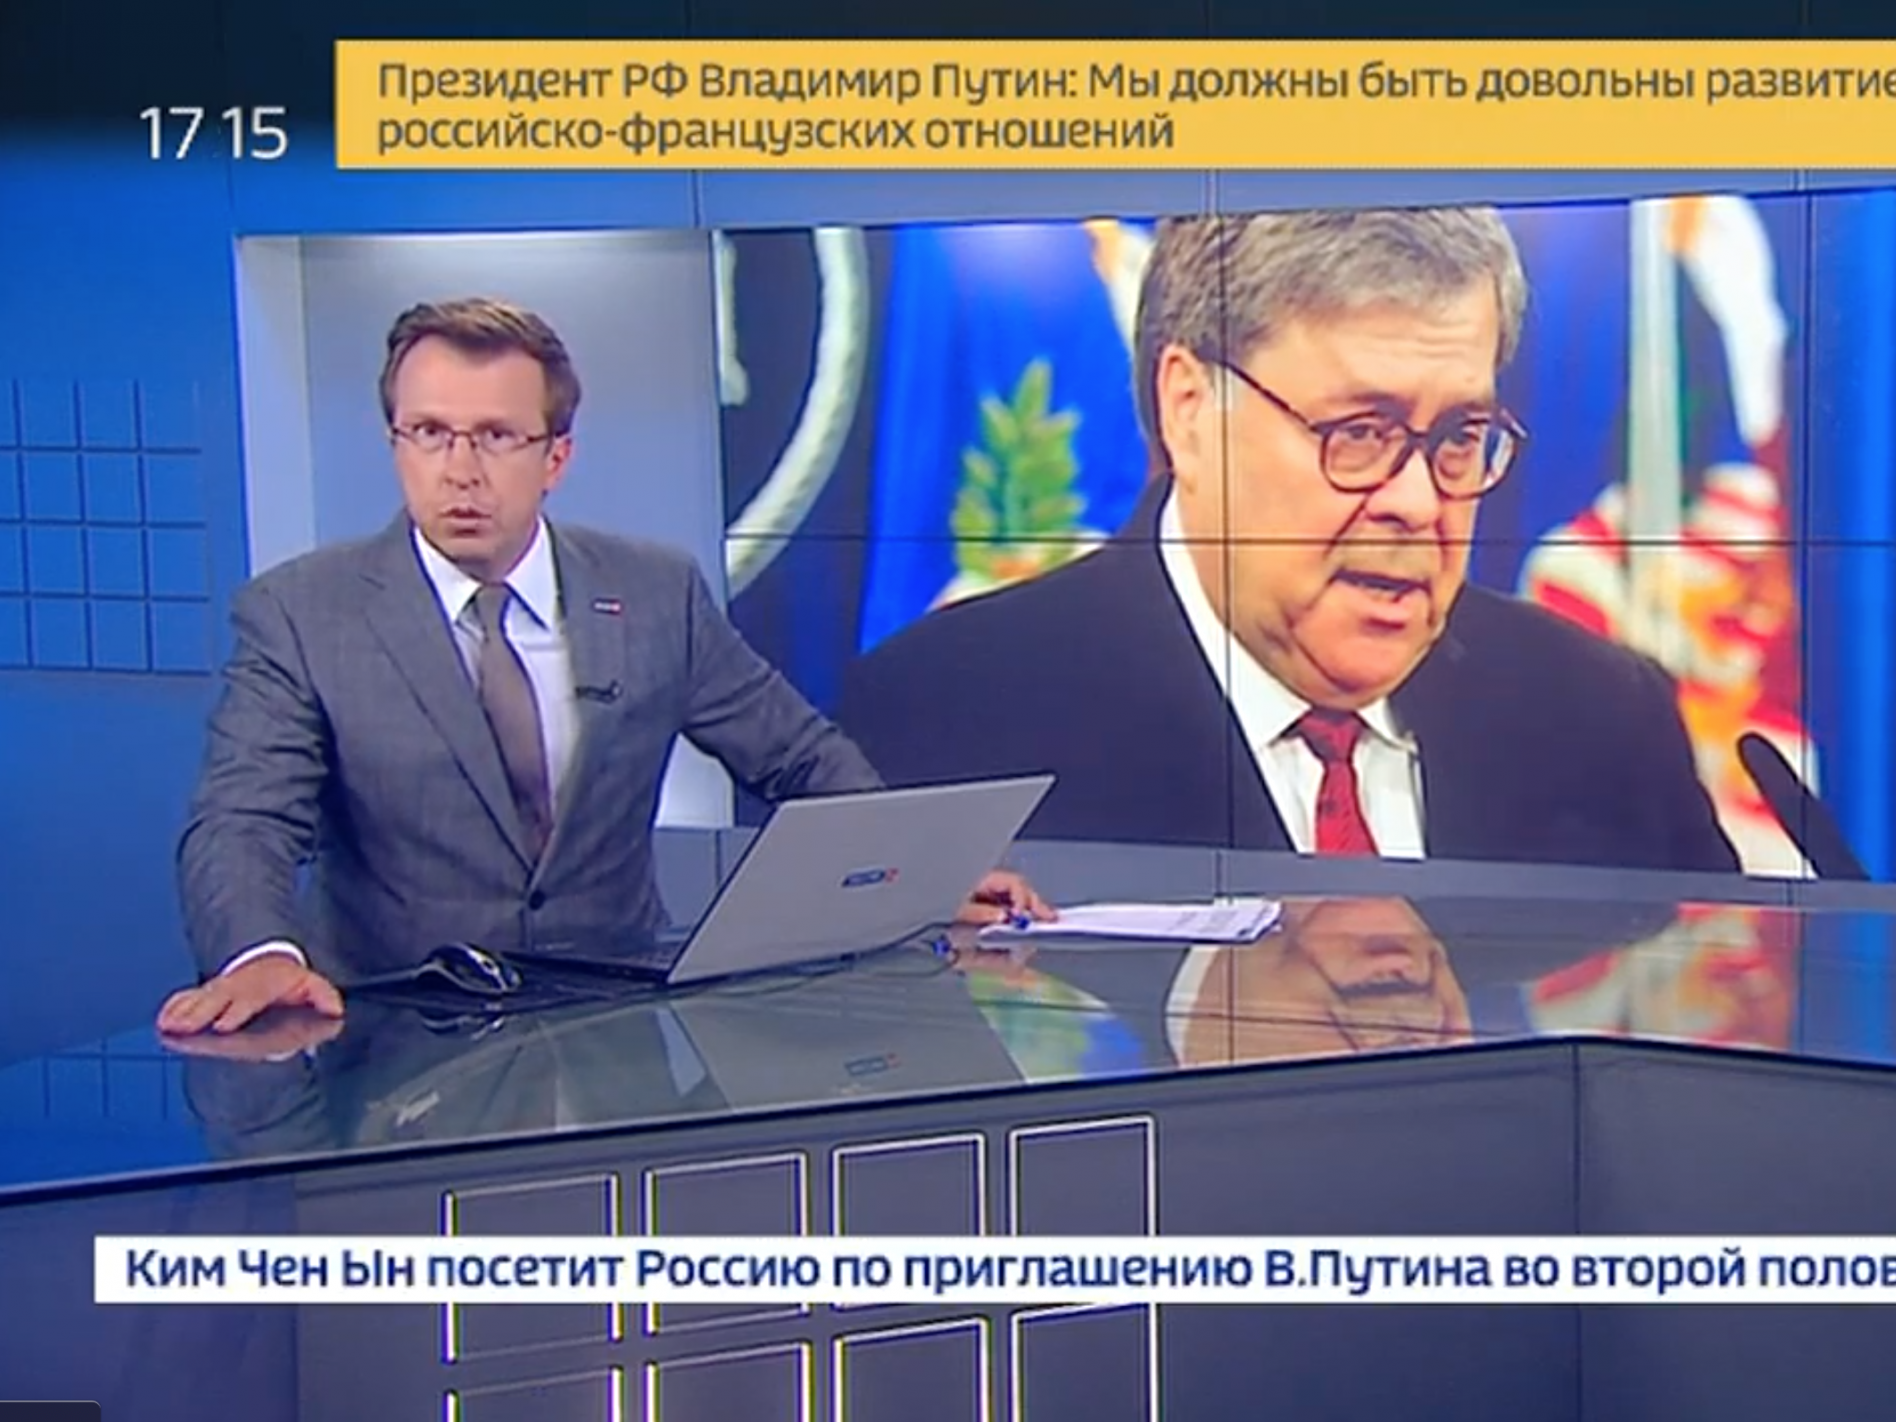 Russian state media responded to the Mueller report with disdain